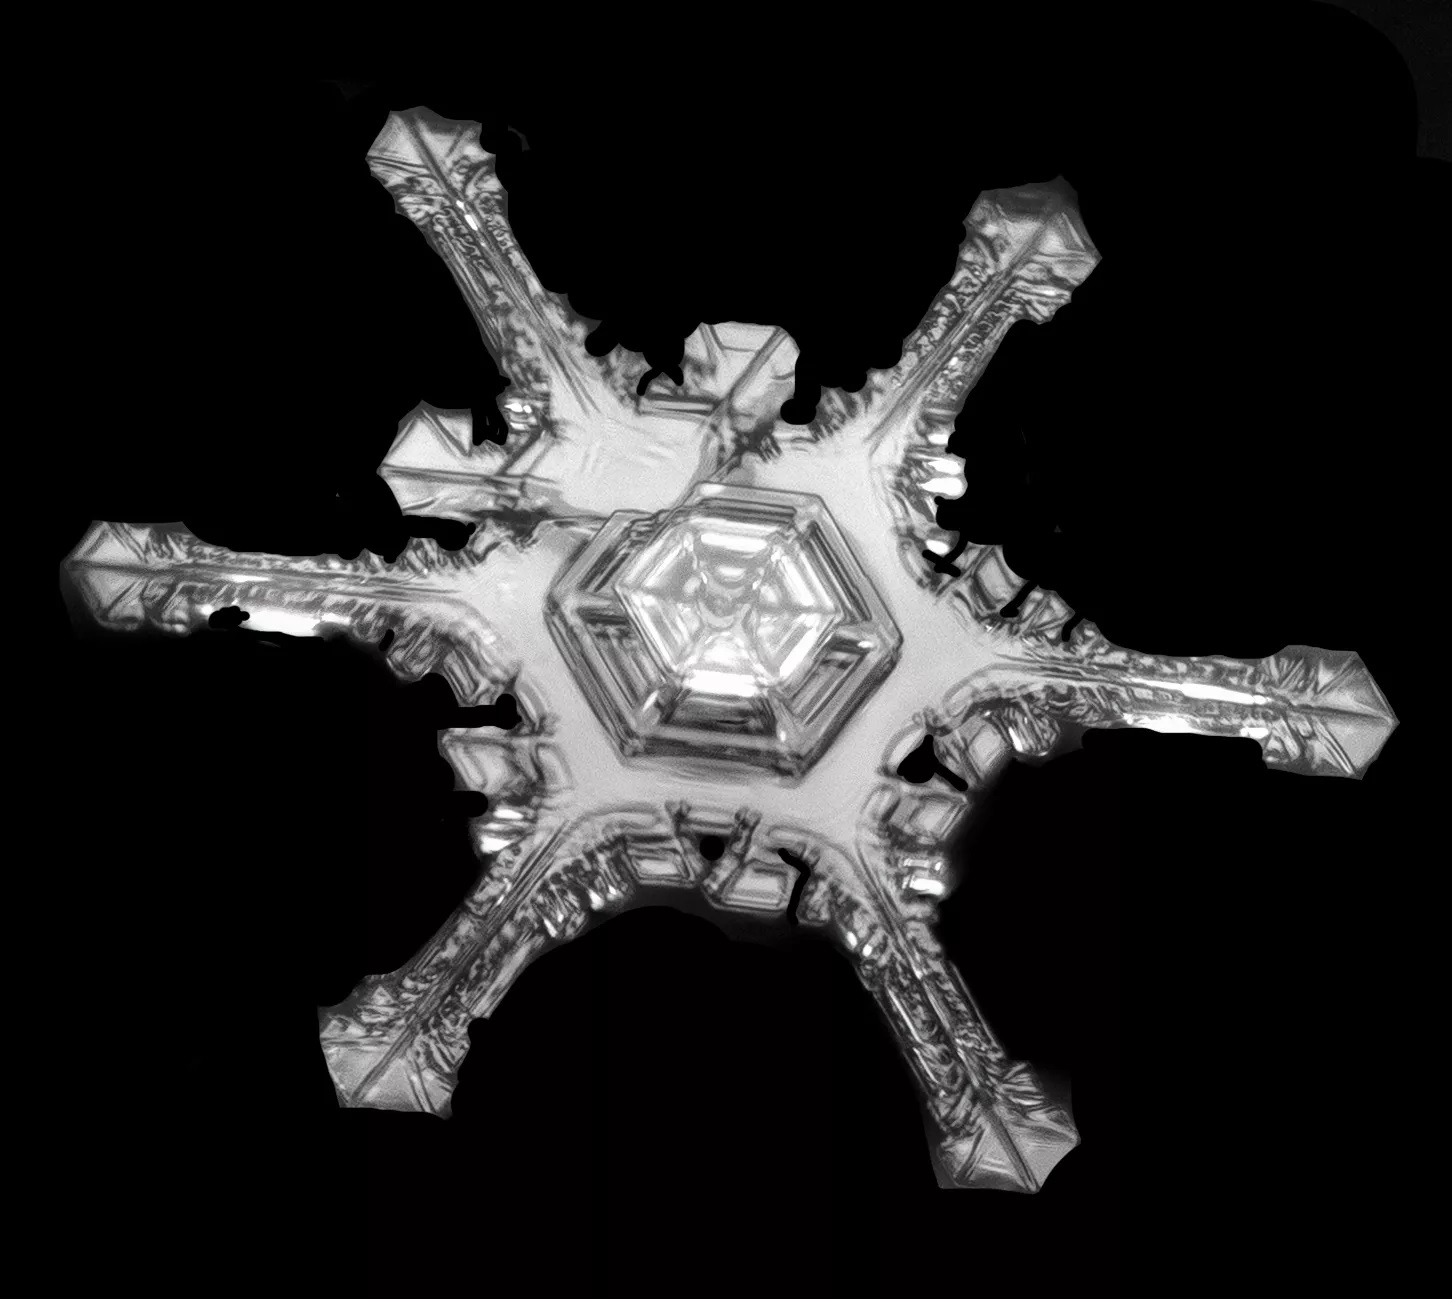 close up image of snowflake with arms of different size on black background